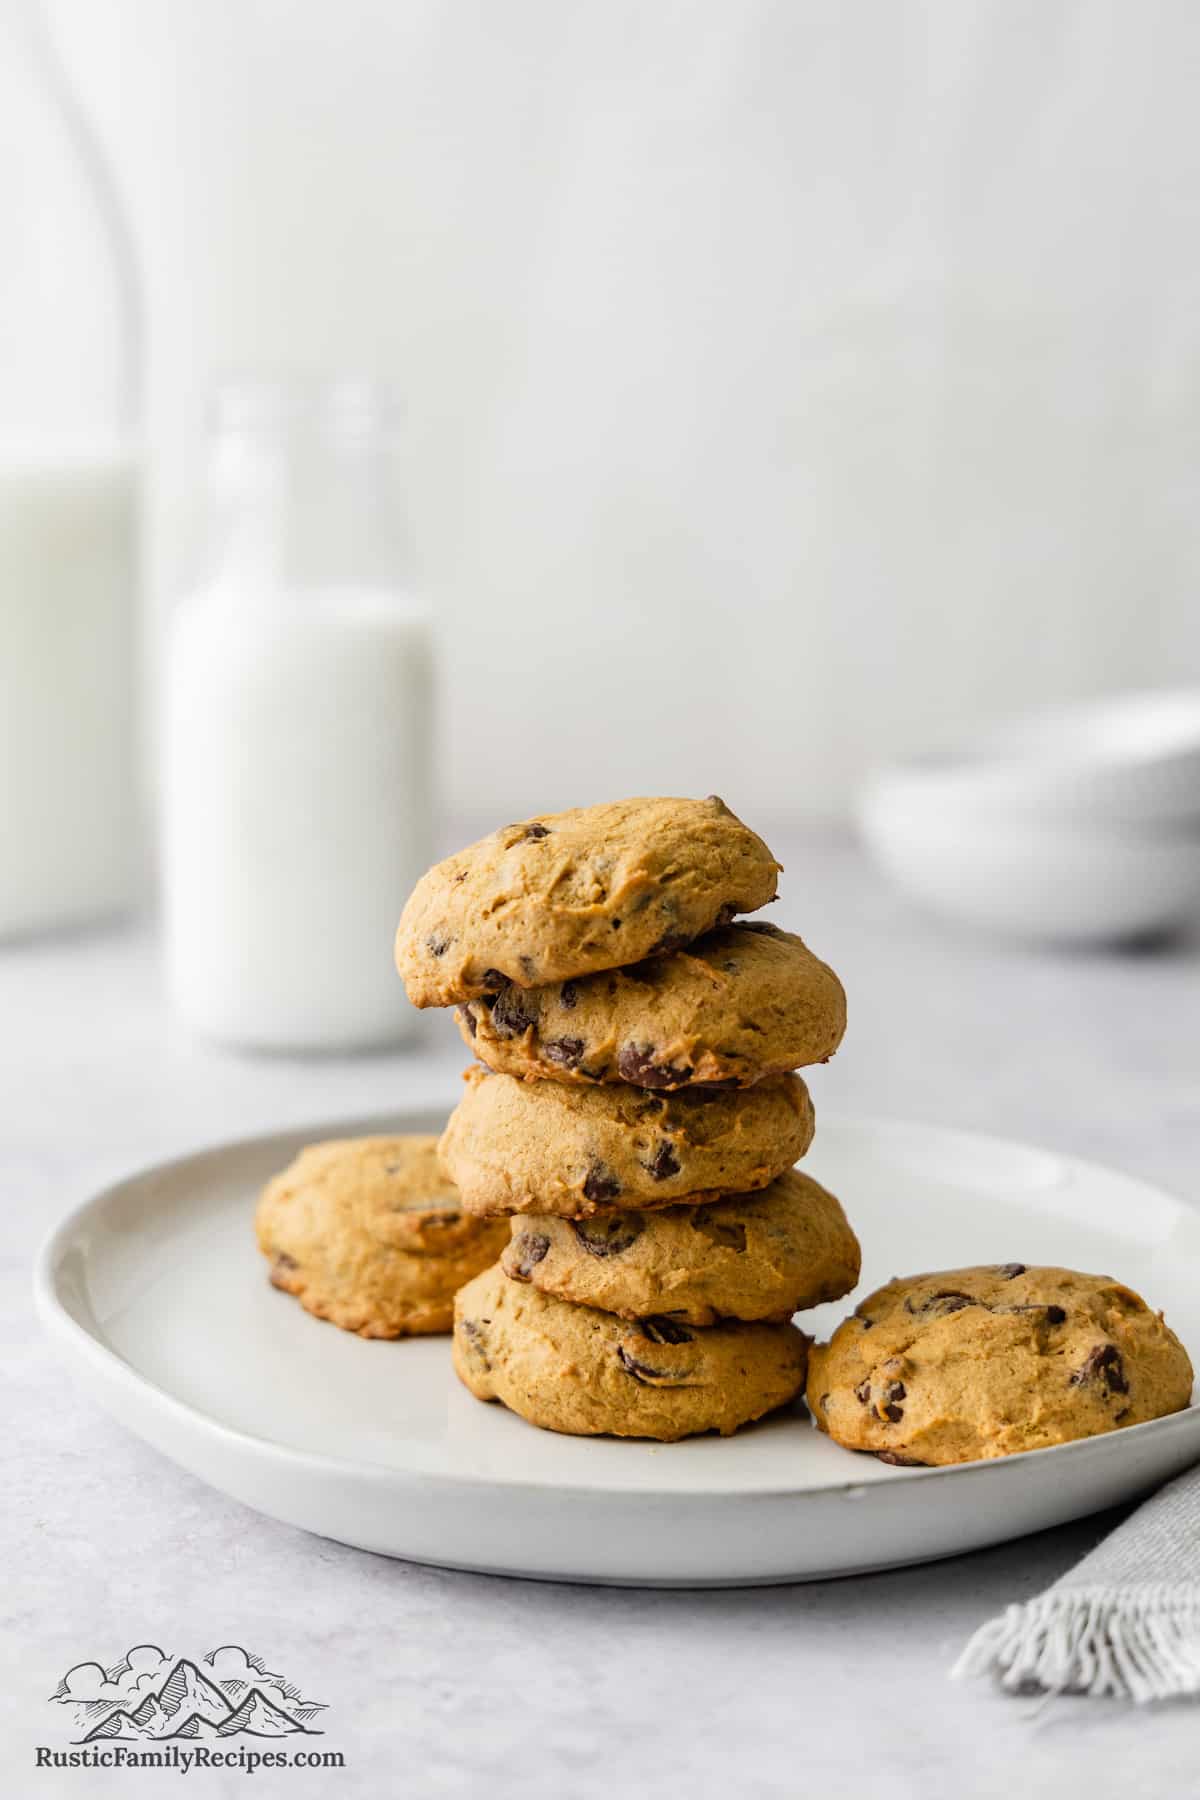 Pumpkin chocolate chip cookies stacked on a plate with a glass of milk in the background.